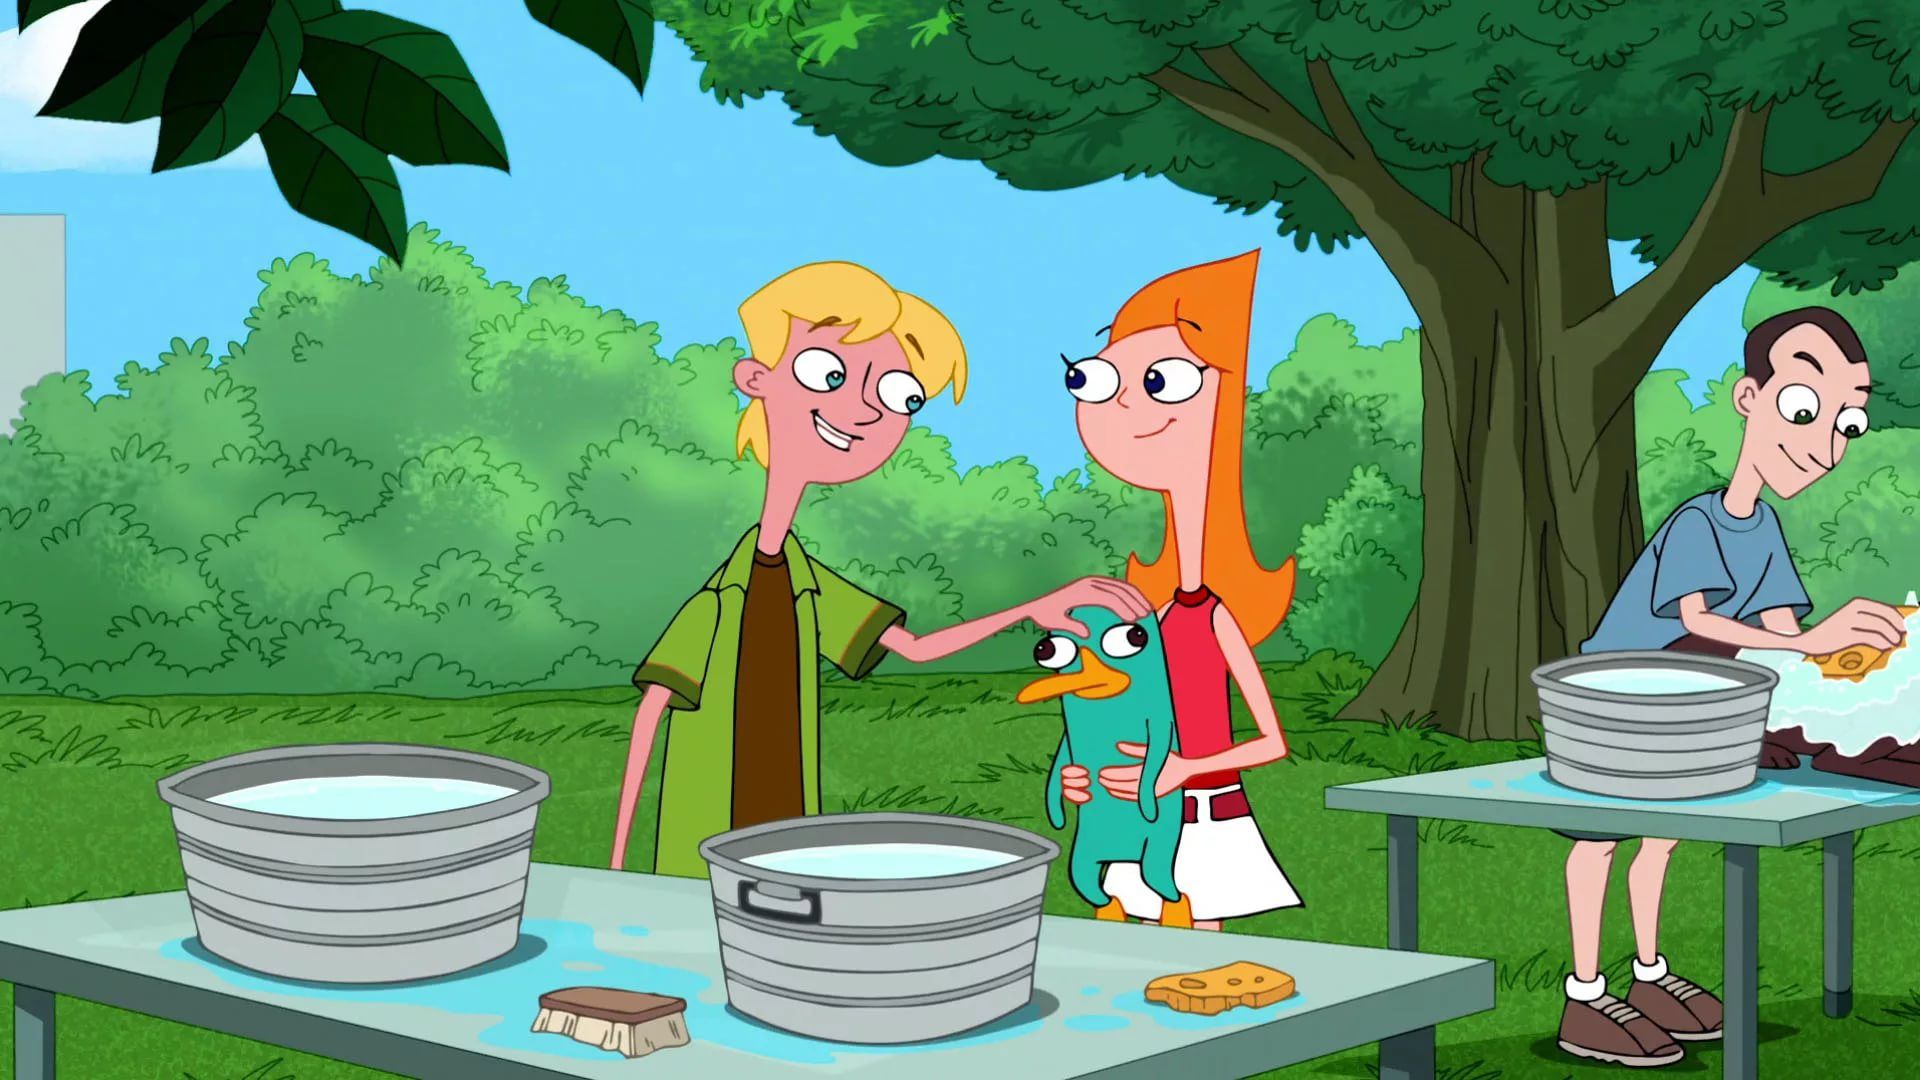 Phineas And Ferb Wikia hd wallpaper